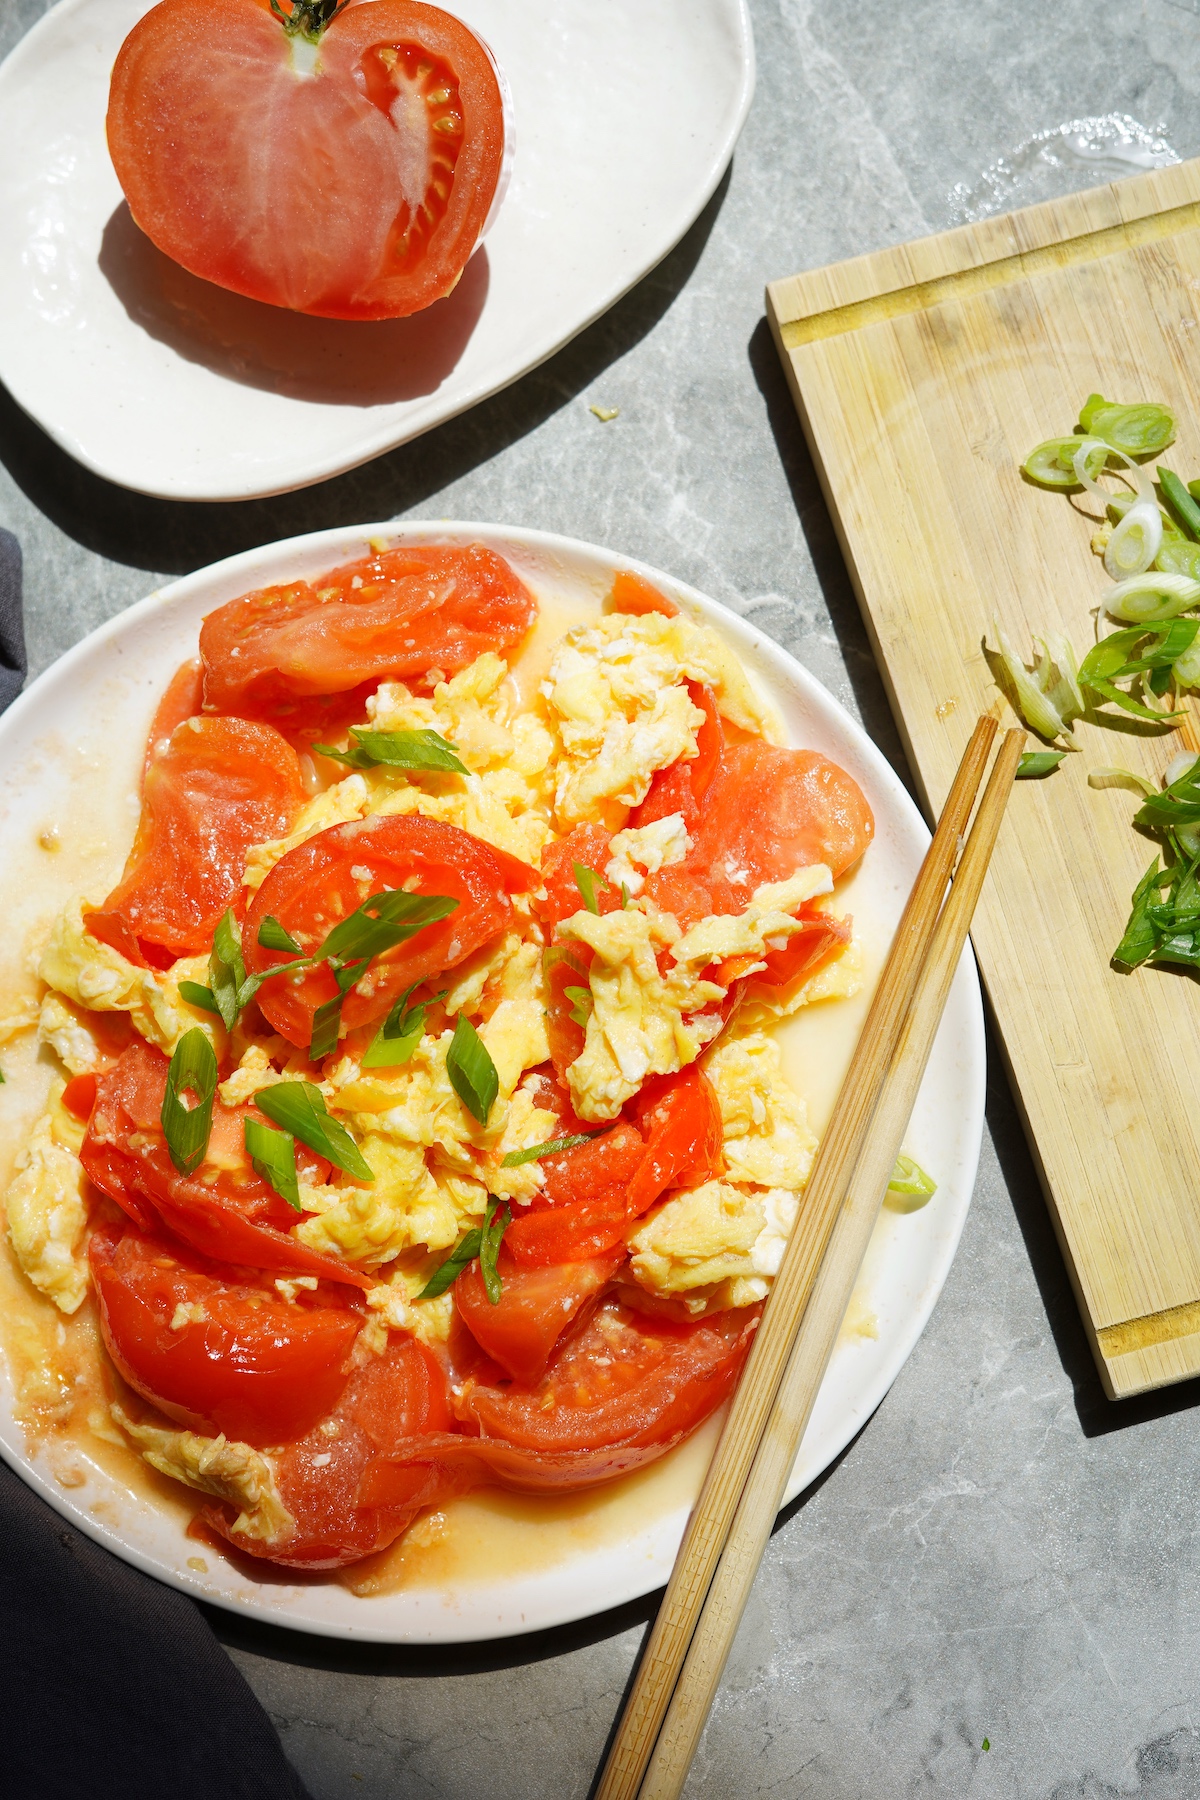 Overview of tomato egg stir-fry.